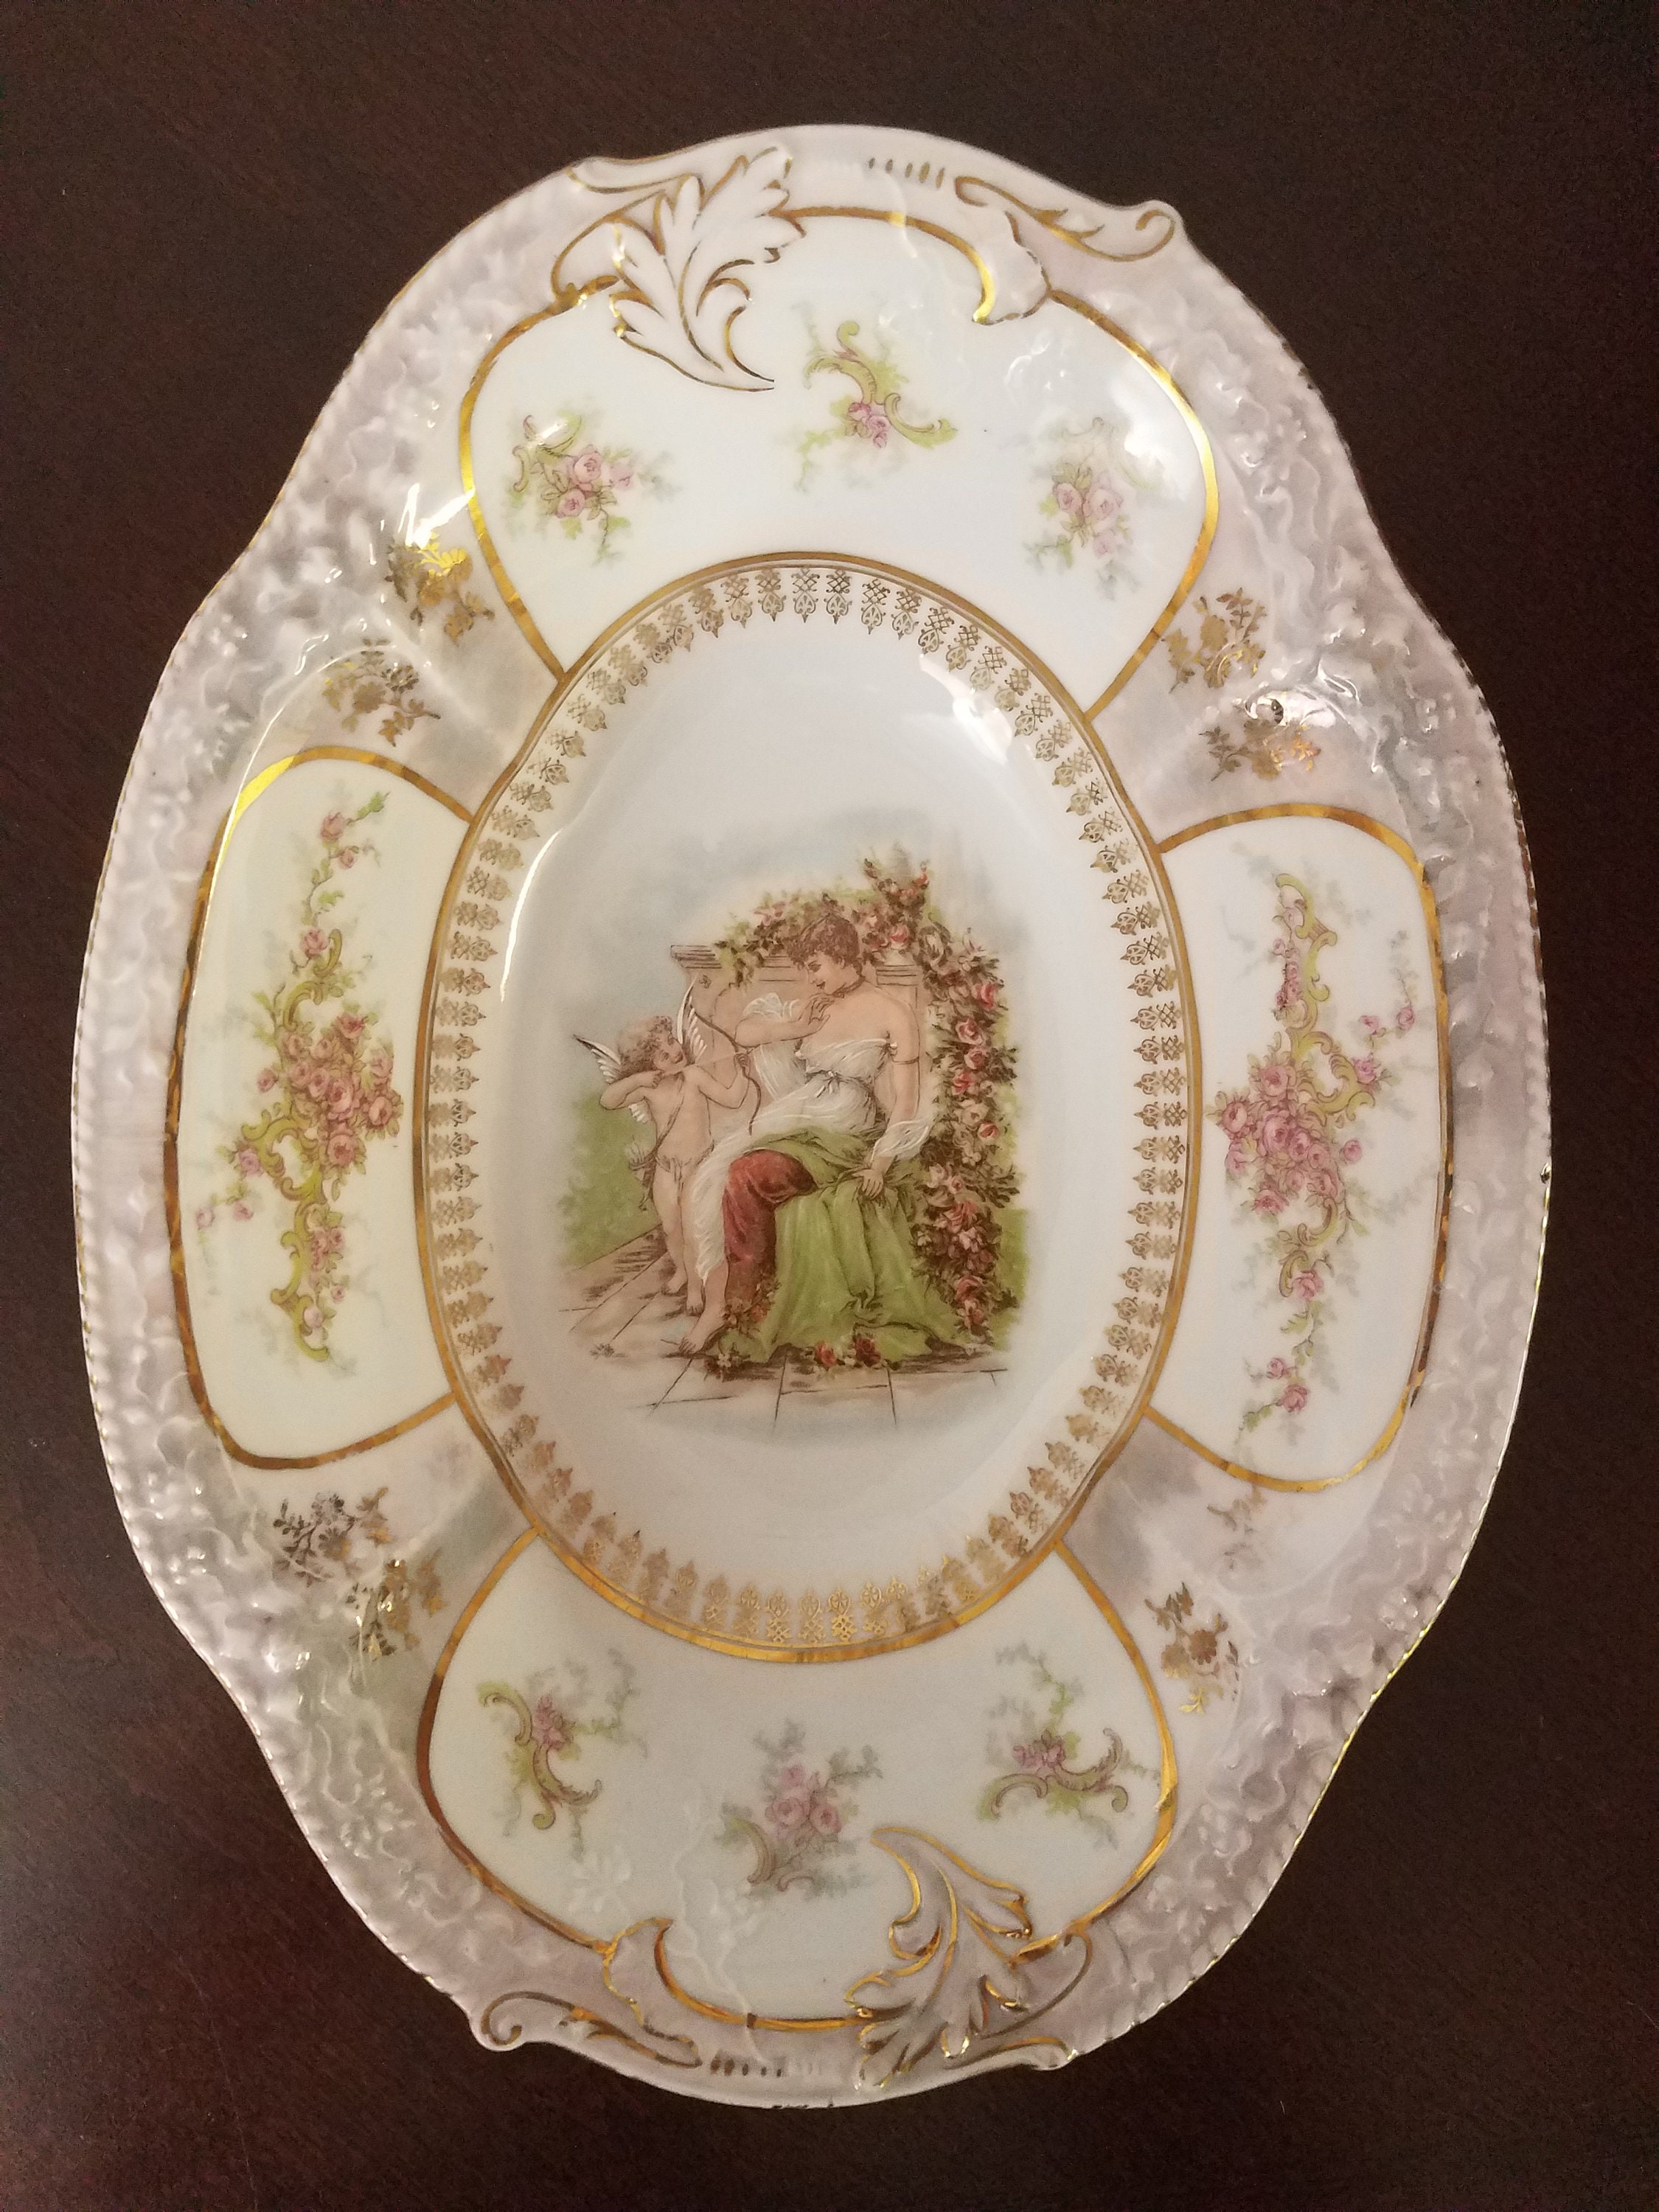 Z. S. & Co Bavaria 1880-1918 Porcelain Bowl With an Image of Cupid Aiming  an Arrow at a Young Woman's Heart Zeh Scherzer - Etsy